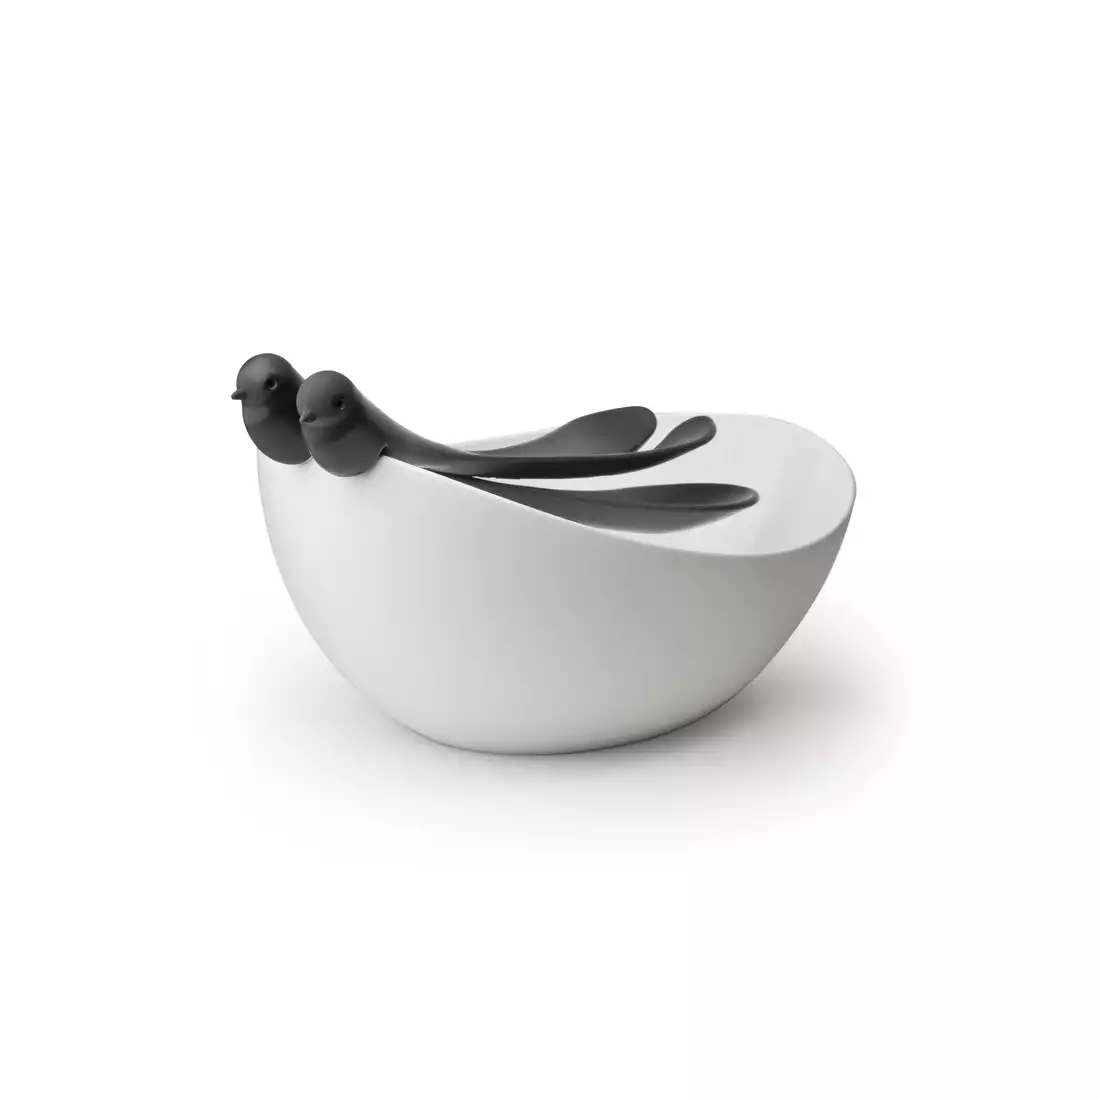 QUALY bowl with salad spoons, black and white